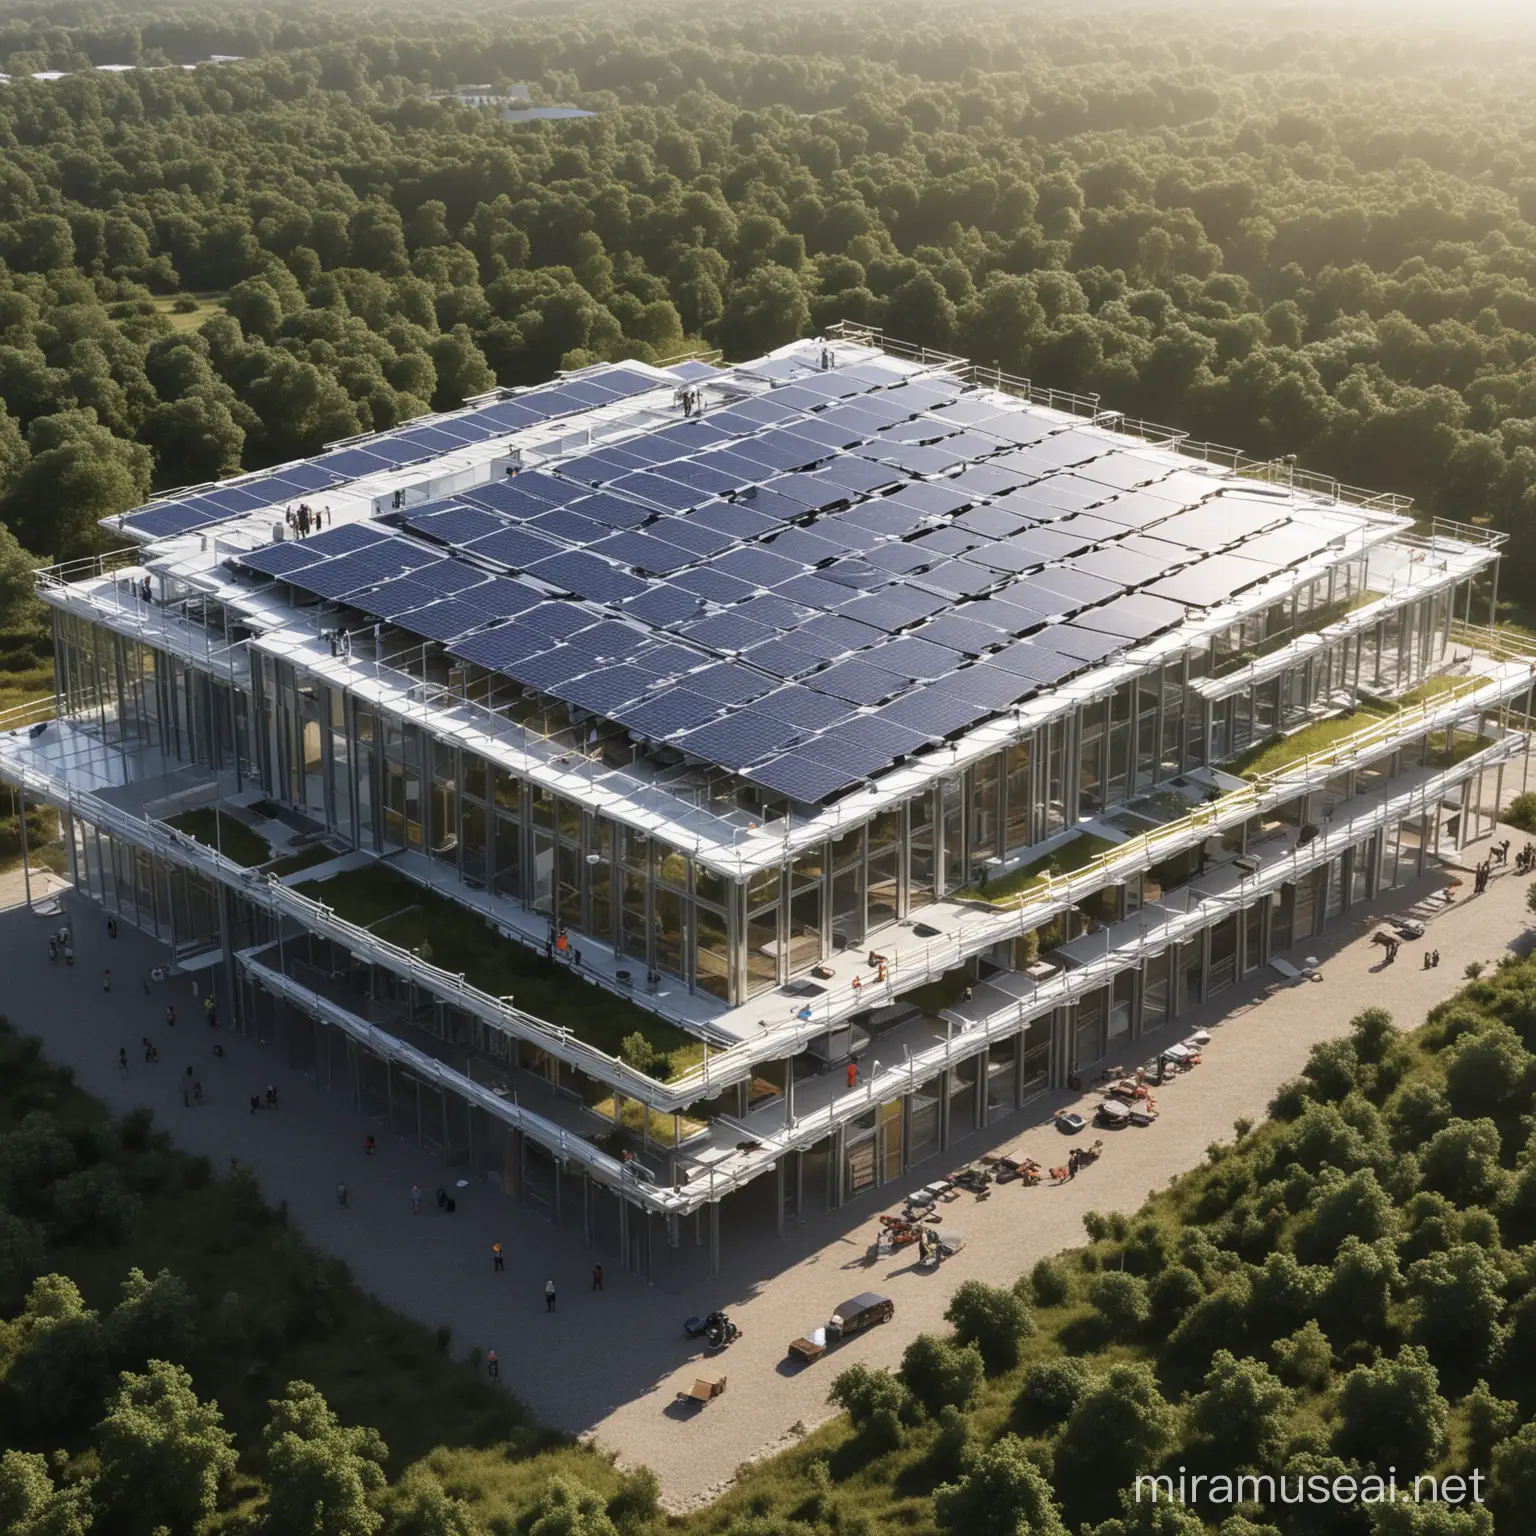 M.I.C.E tripple story, sustainable super structure with intergrated roof solar panels